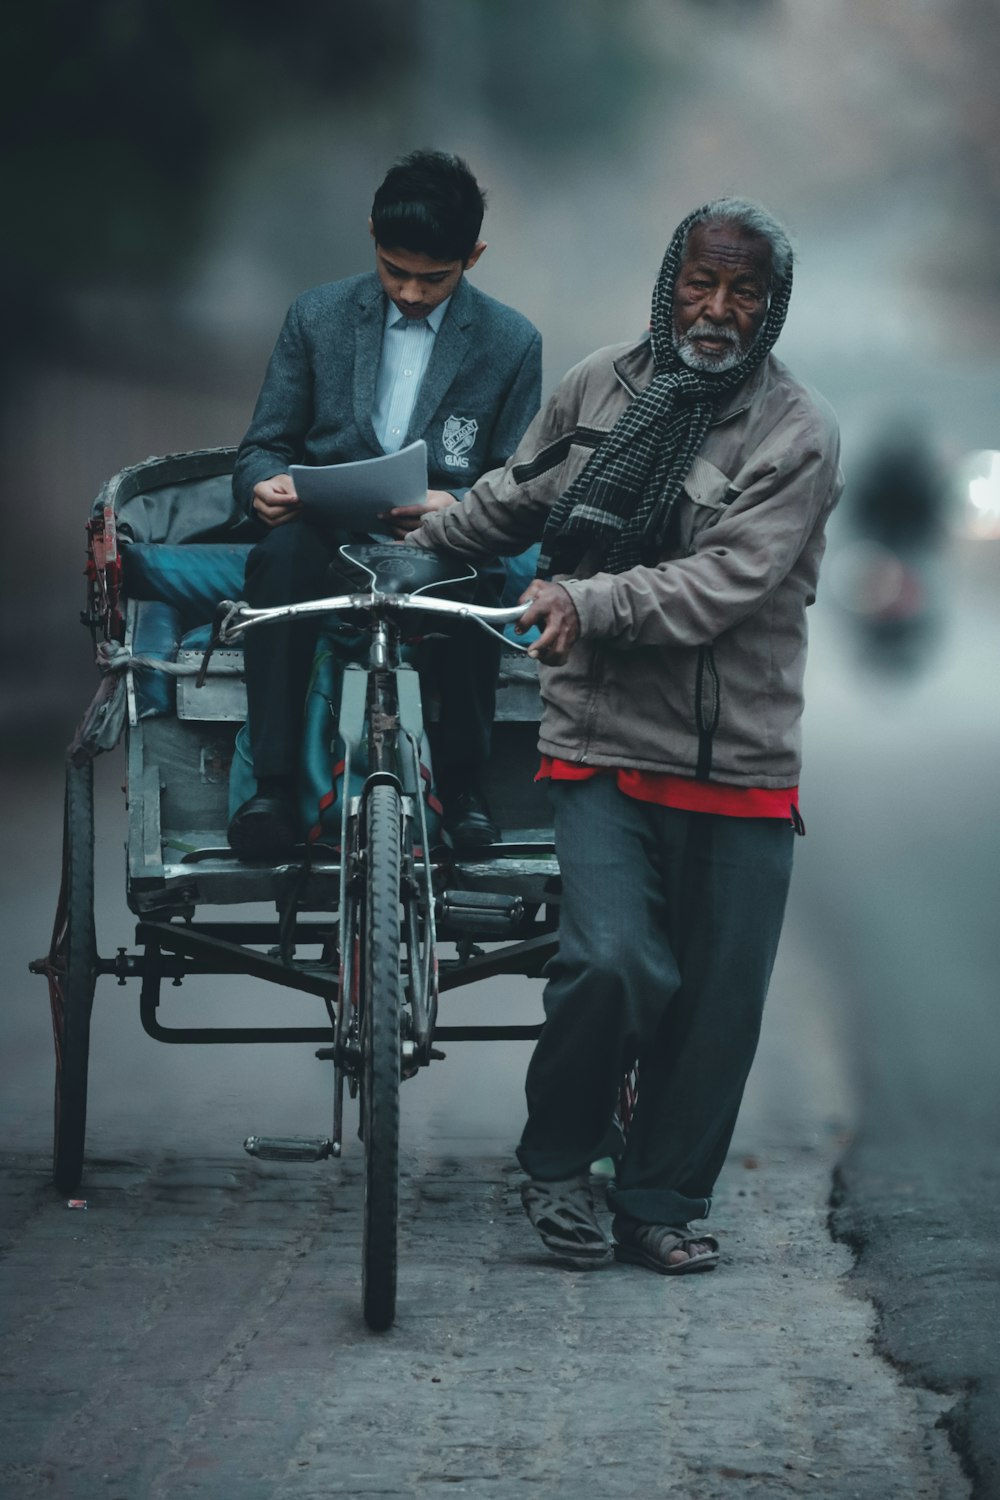 a man pushing a man on a bicycle